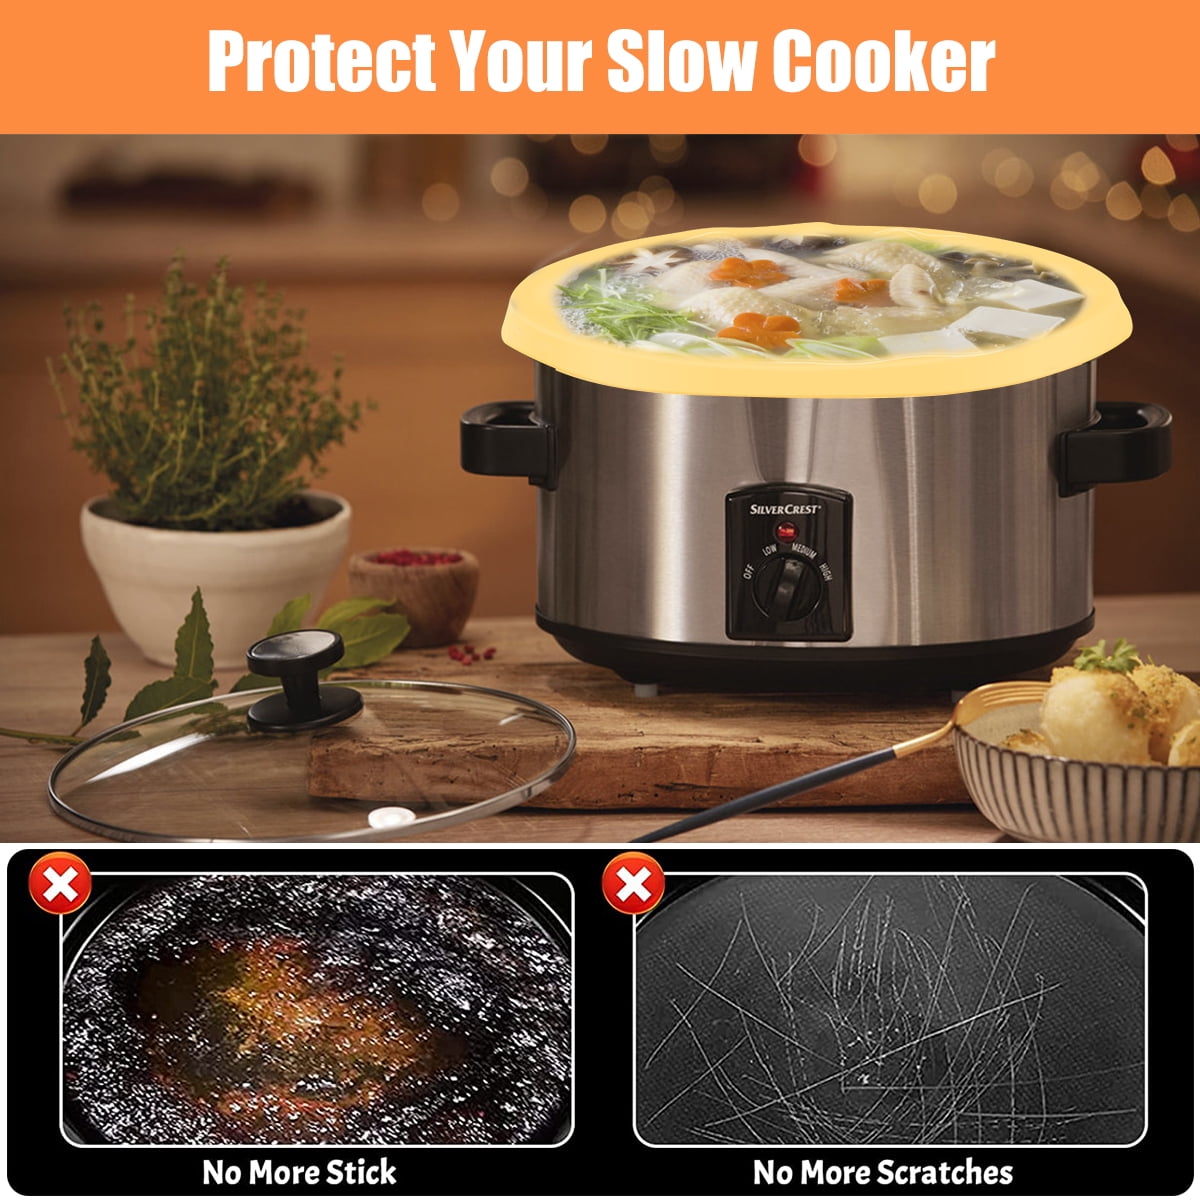 RONCRONC Reusable Eco-Friendly Multi-Use Silicone Divers and Liner Set for  Slow Cookers